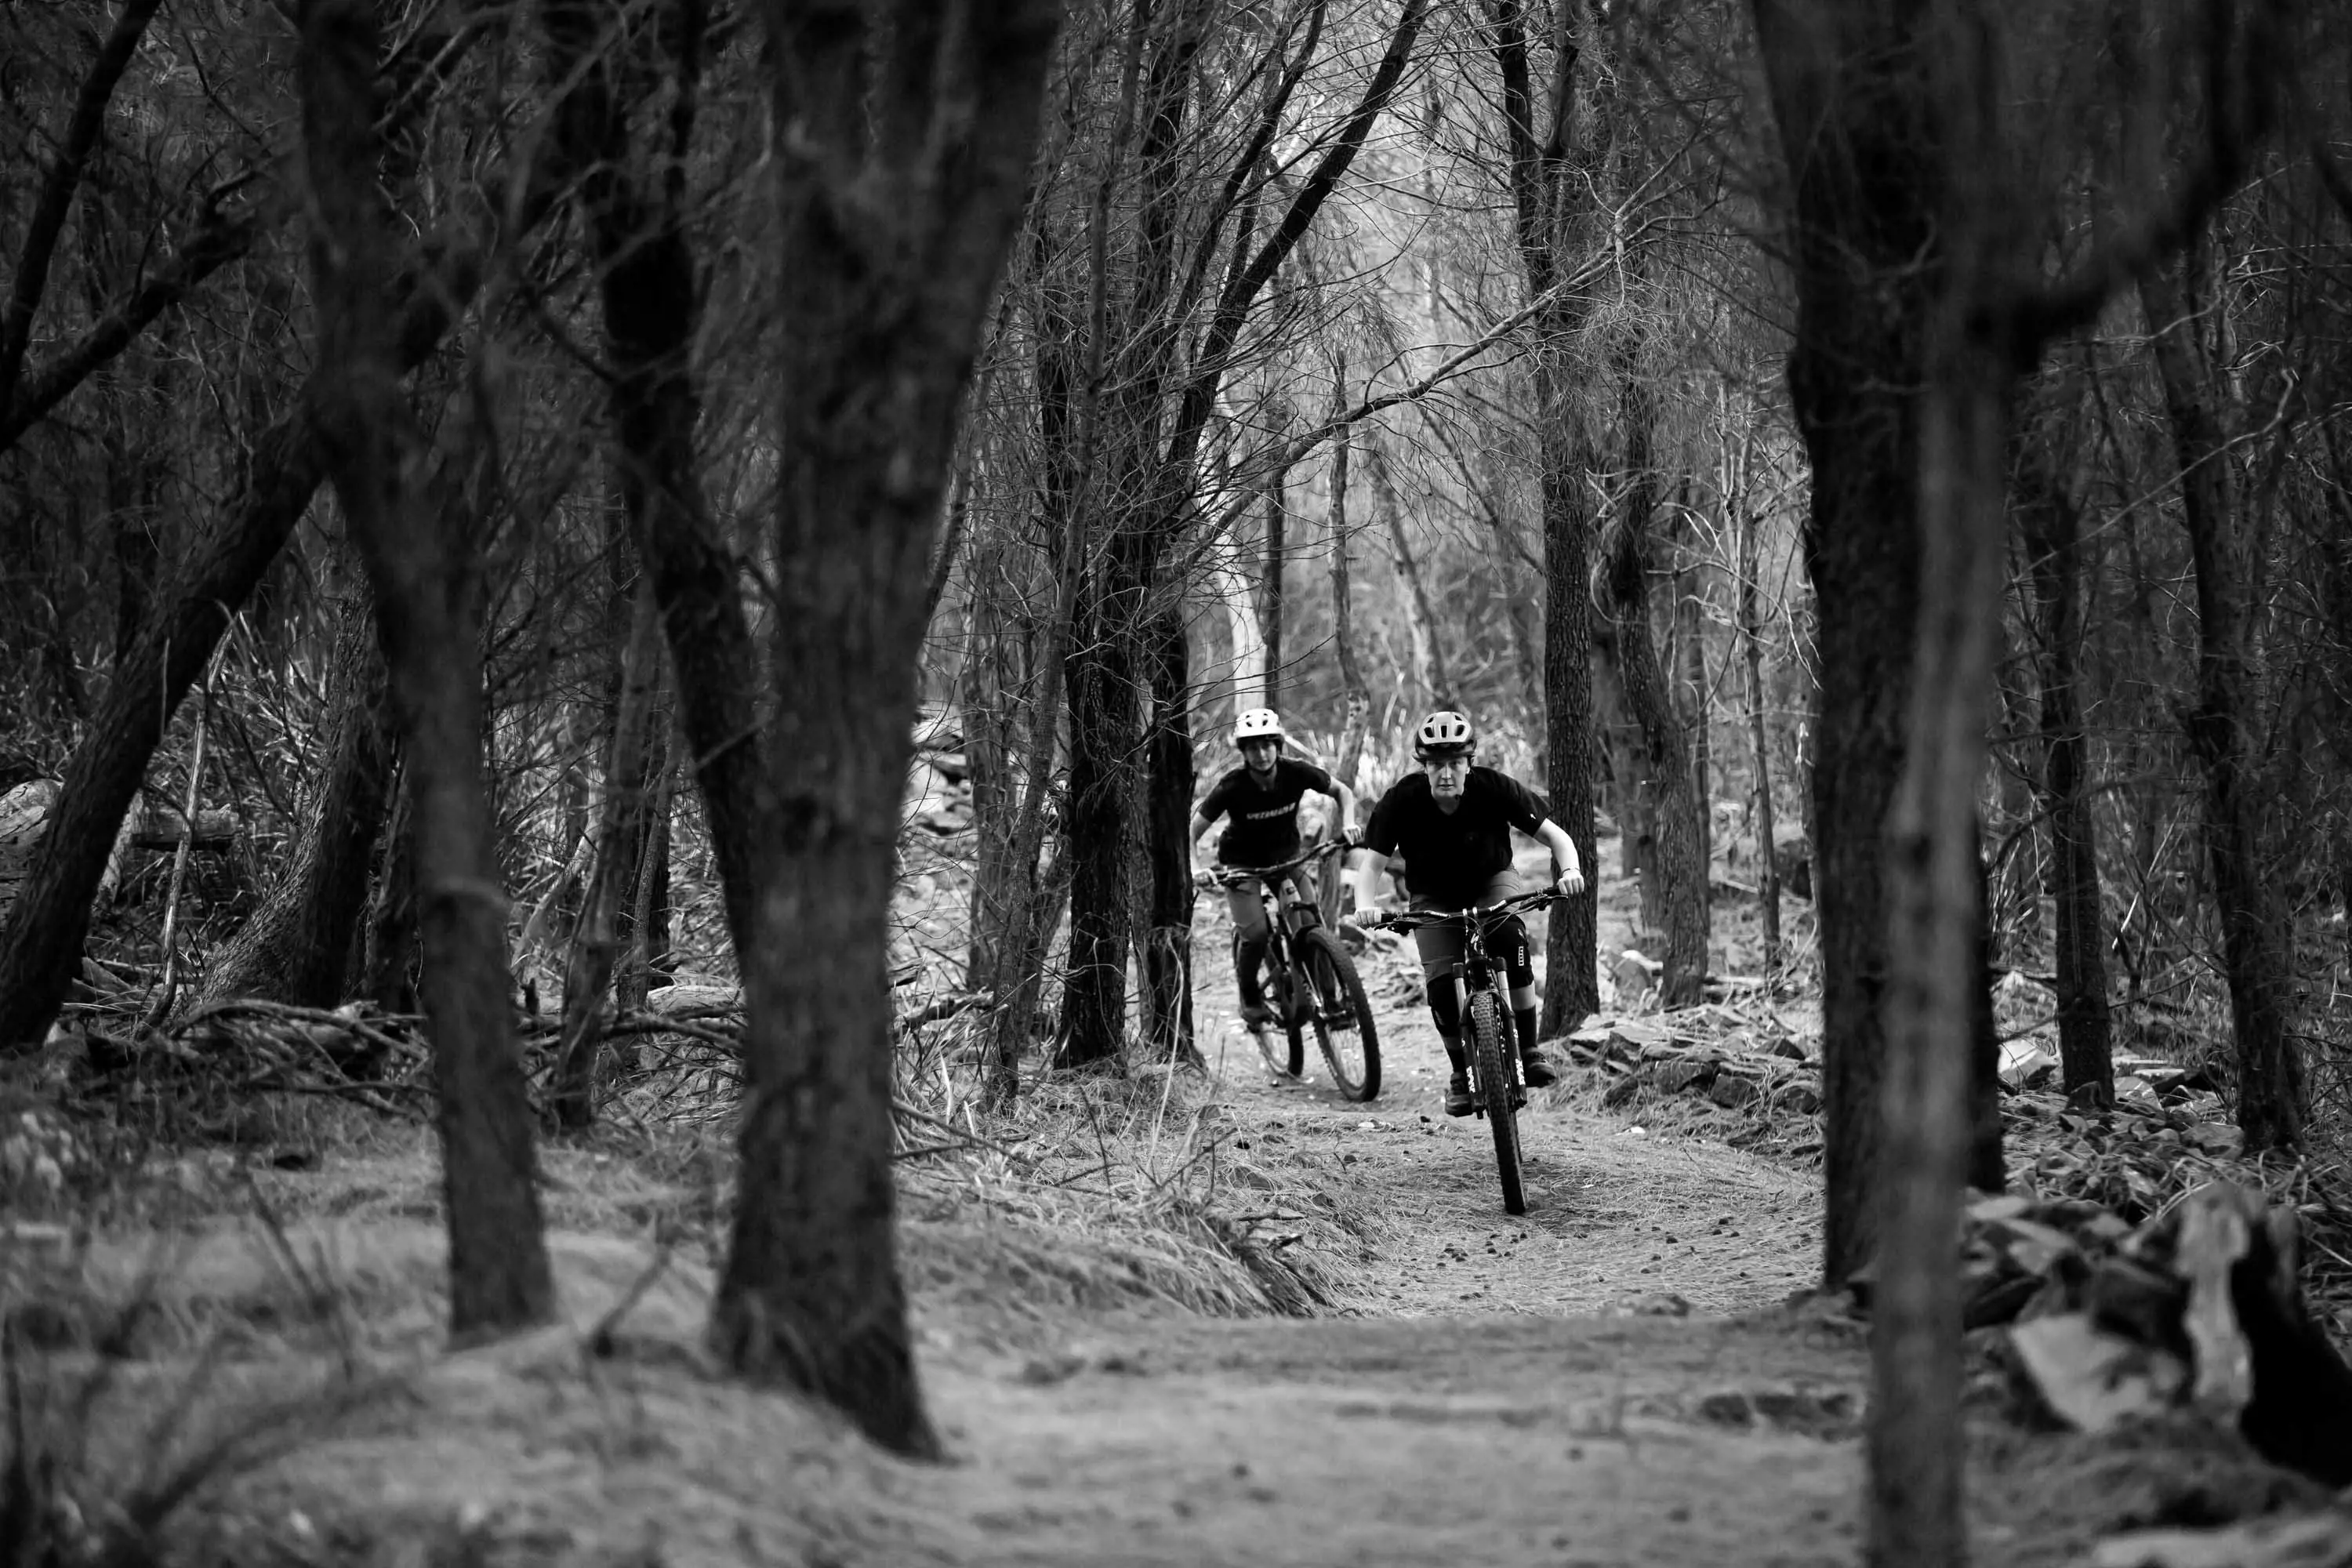 Two mountain bike riders wearing helmets ride on a trail through thick, dry forest.